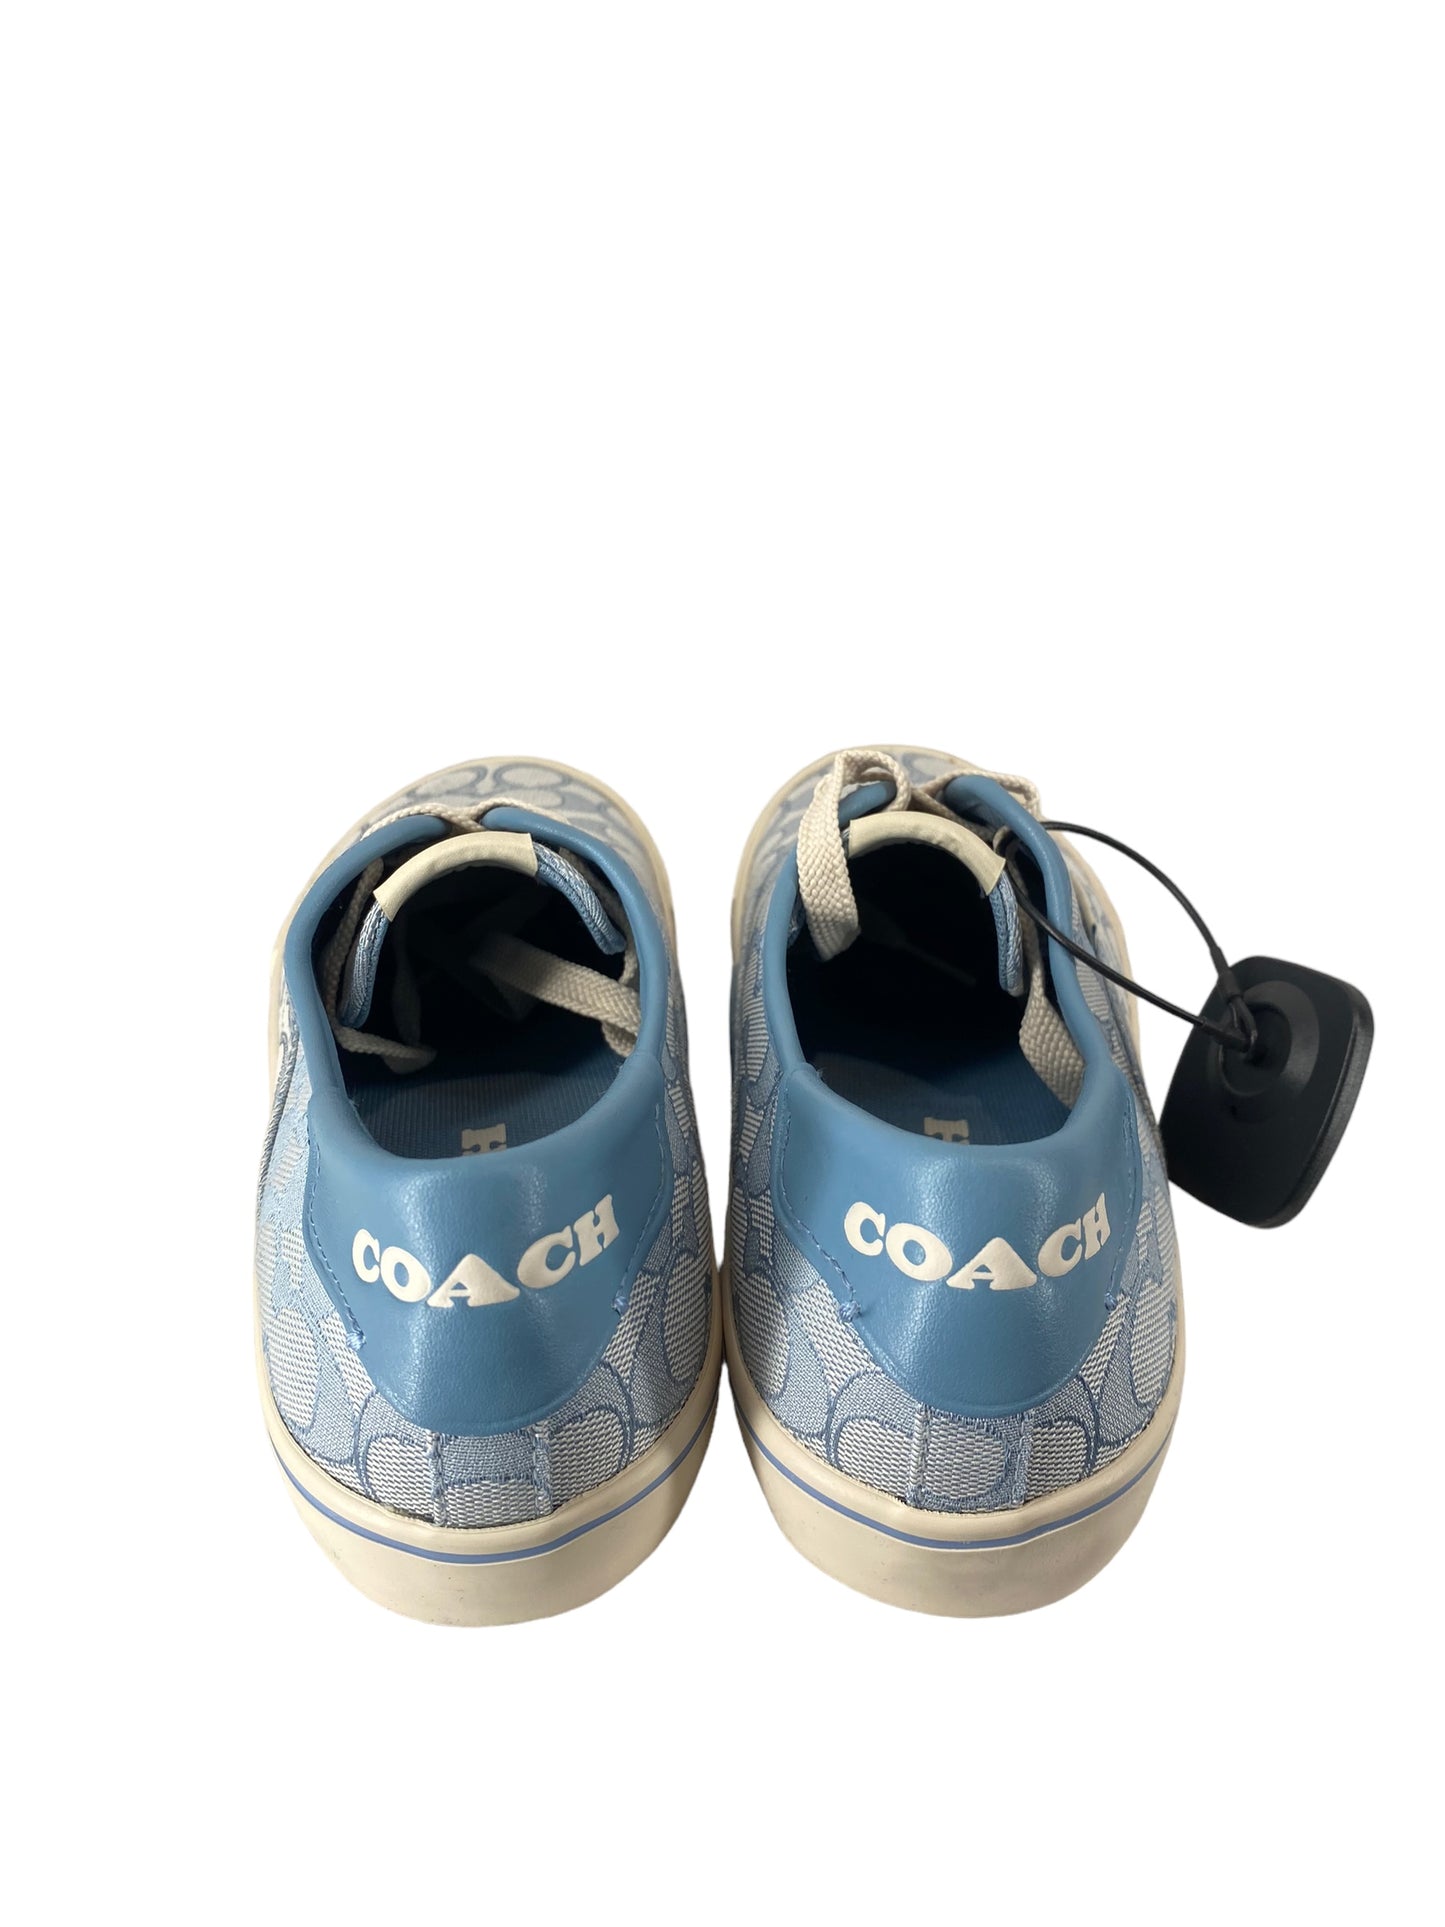 Shoes Sneakers By Coach  Size: 7.5